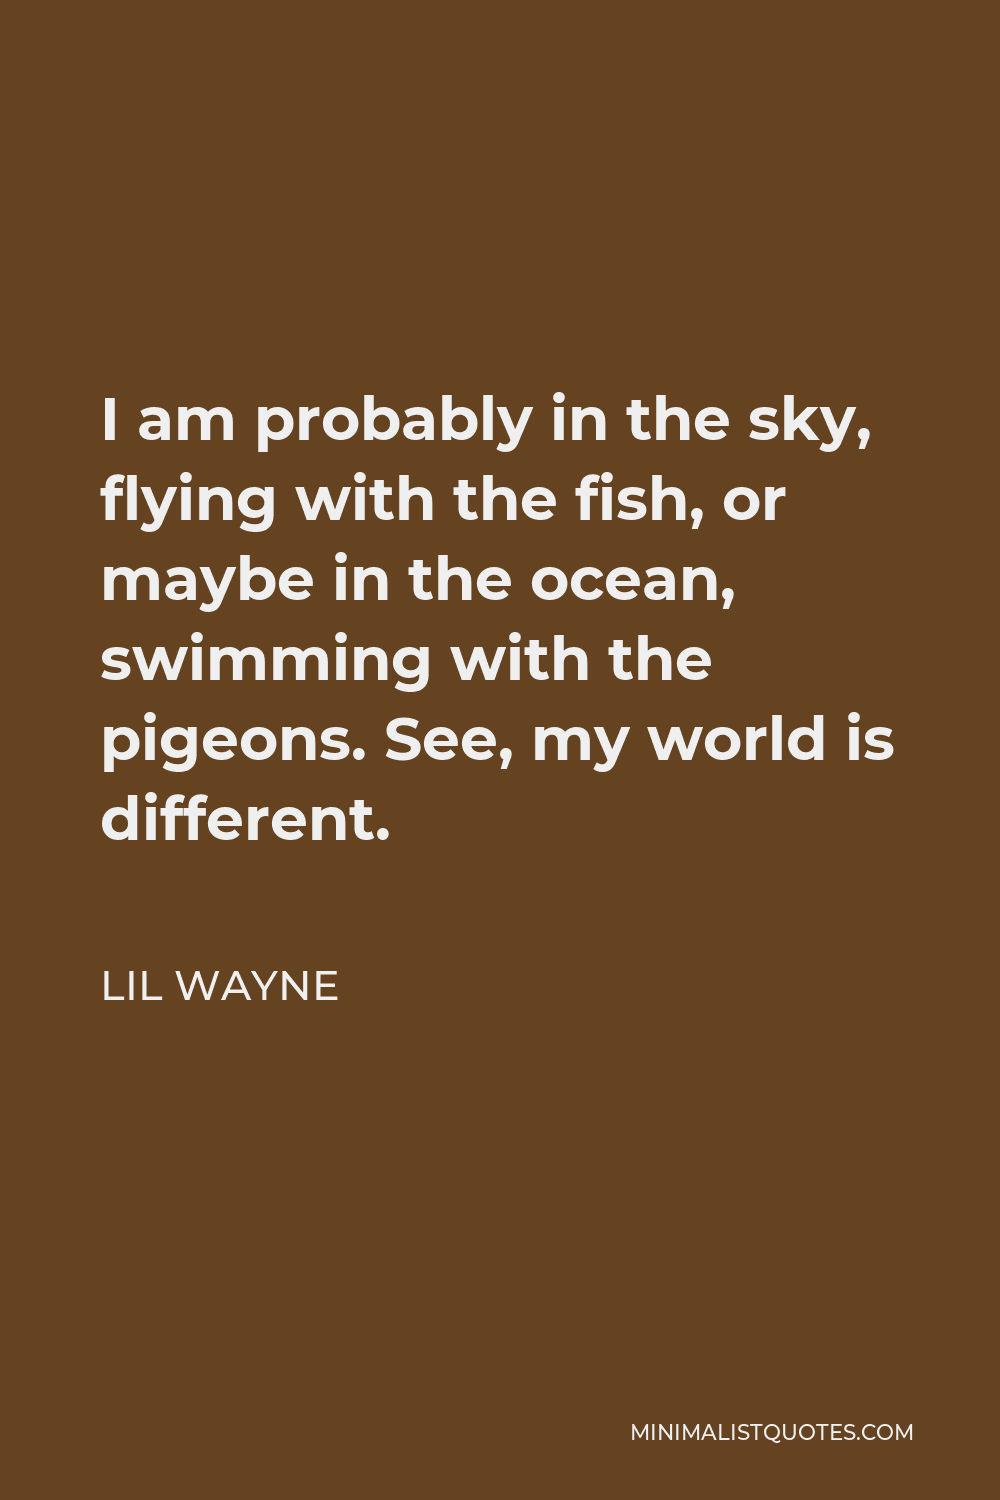 Lil Wayne Quote - I am probably in the sky, flying with the fish, or maybe in the ocean, swimming with the pigeons. See, my world is different.